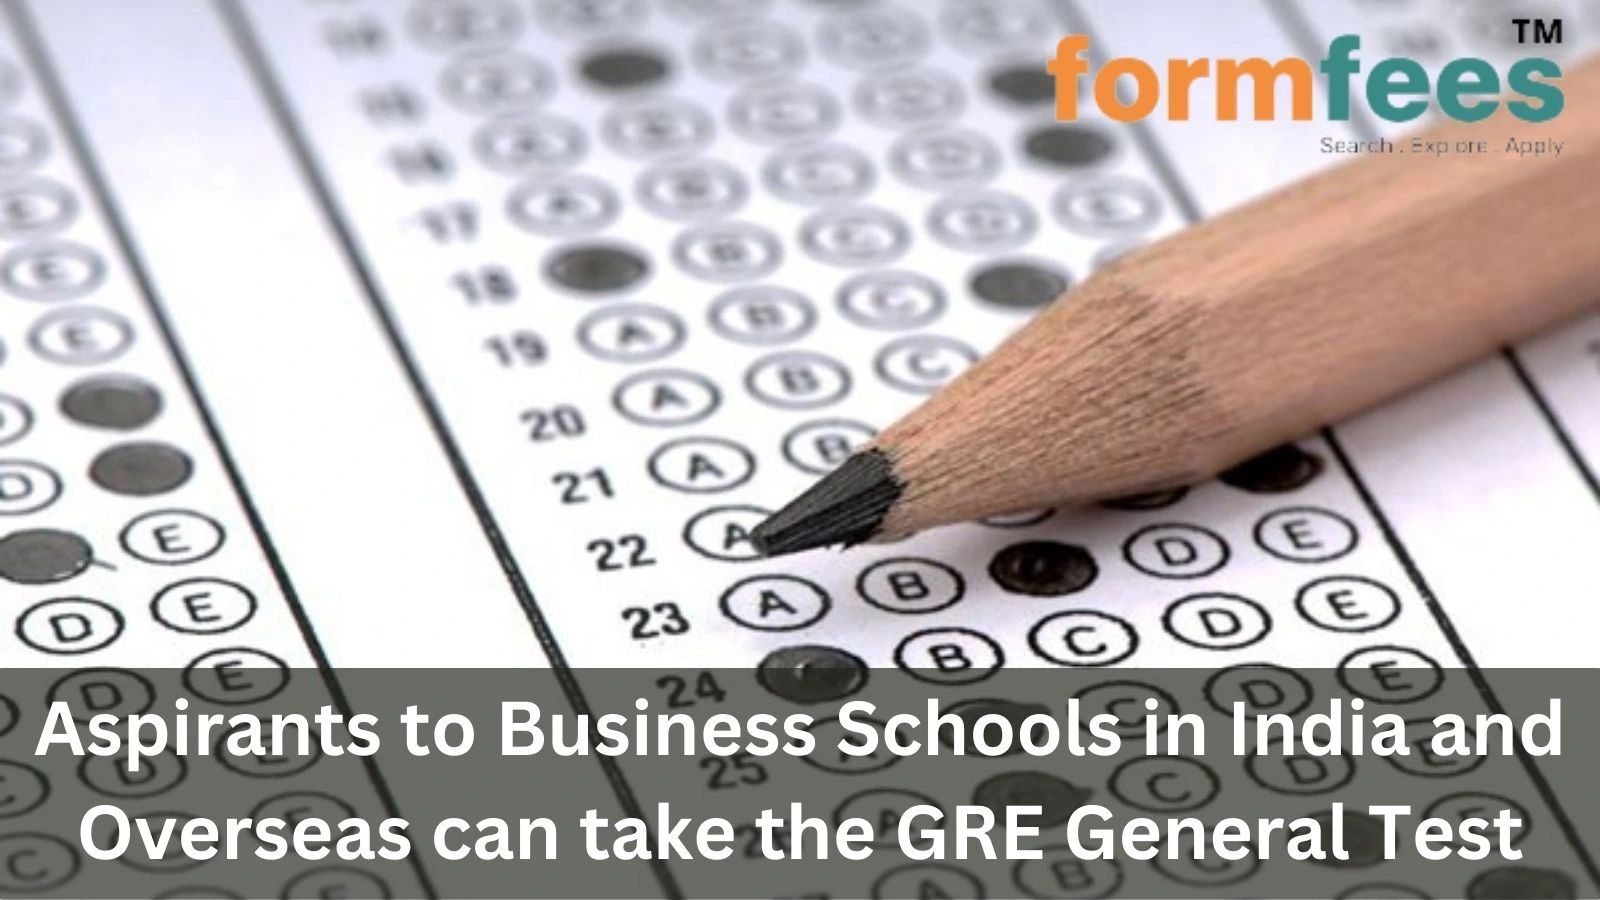 Aspirants to Business Schools in India and Overseas can take the GRE General Test